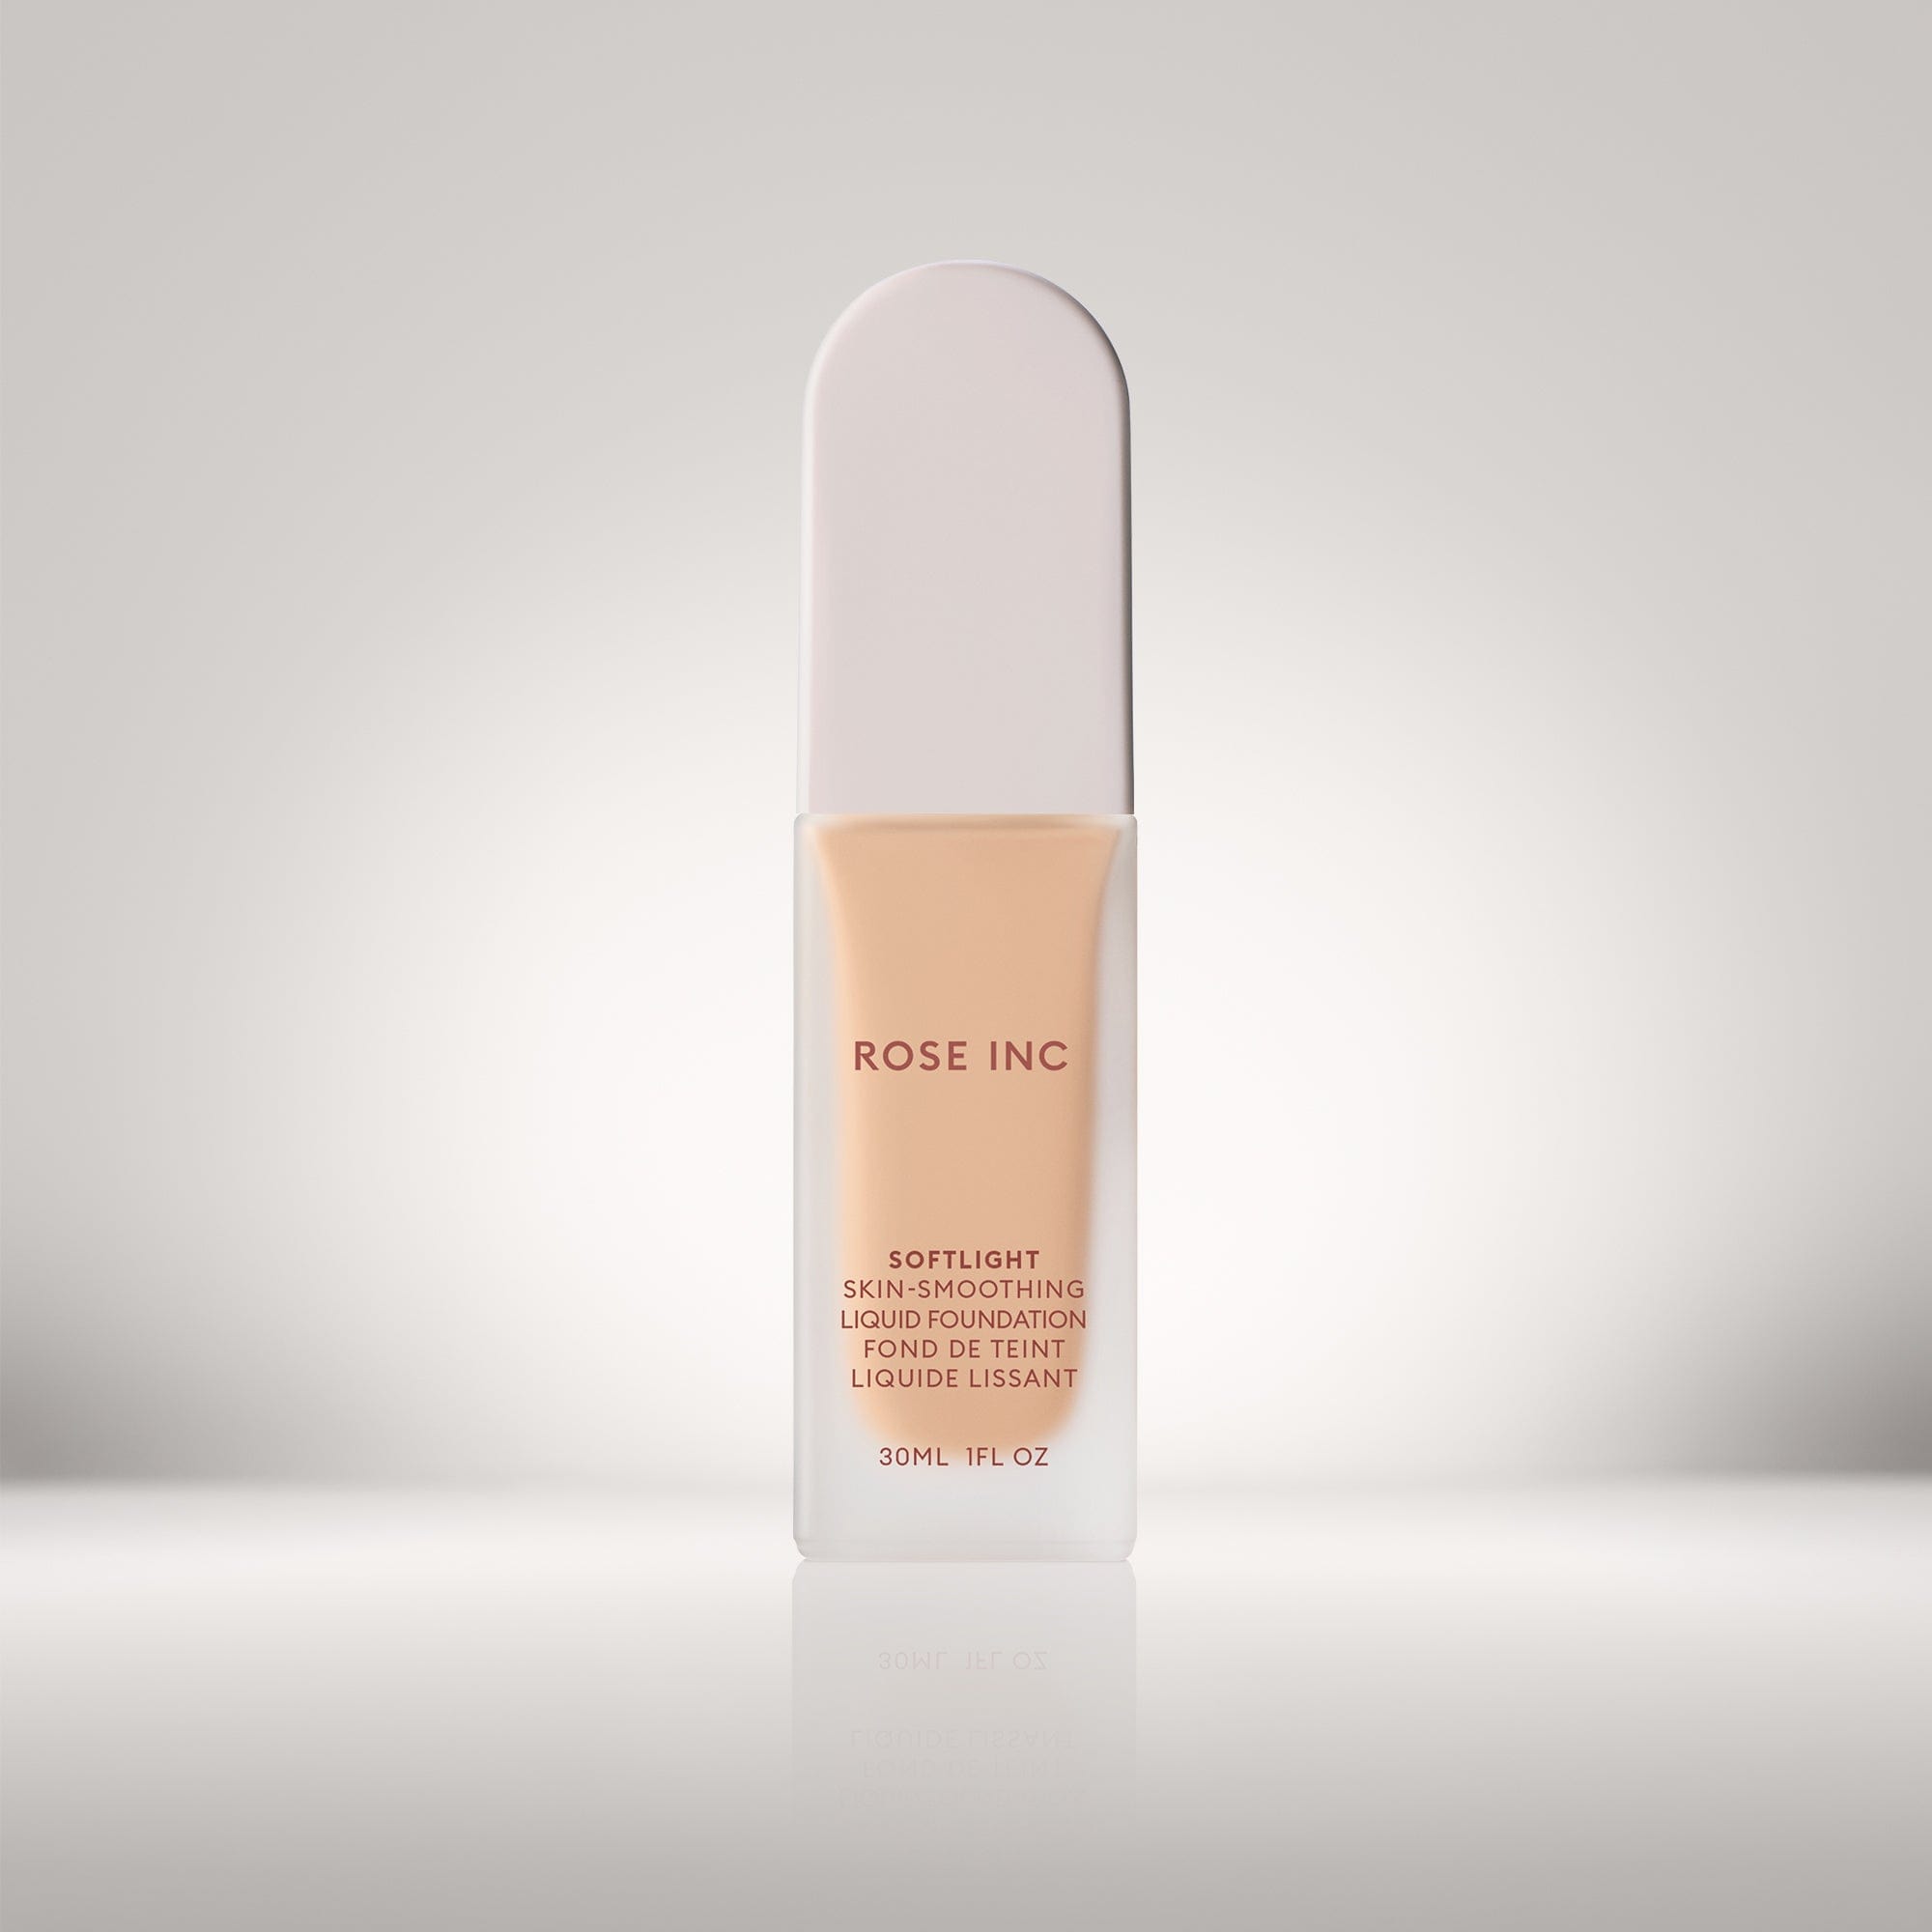 Soldier image of shade 9W in Softlight Smoothing Foundation